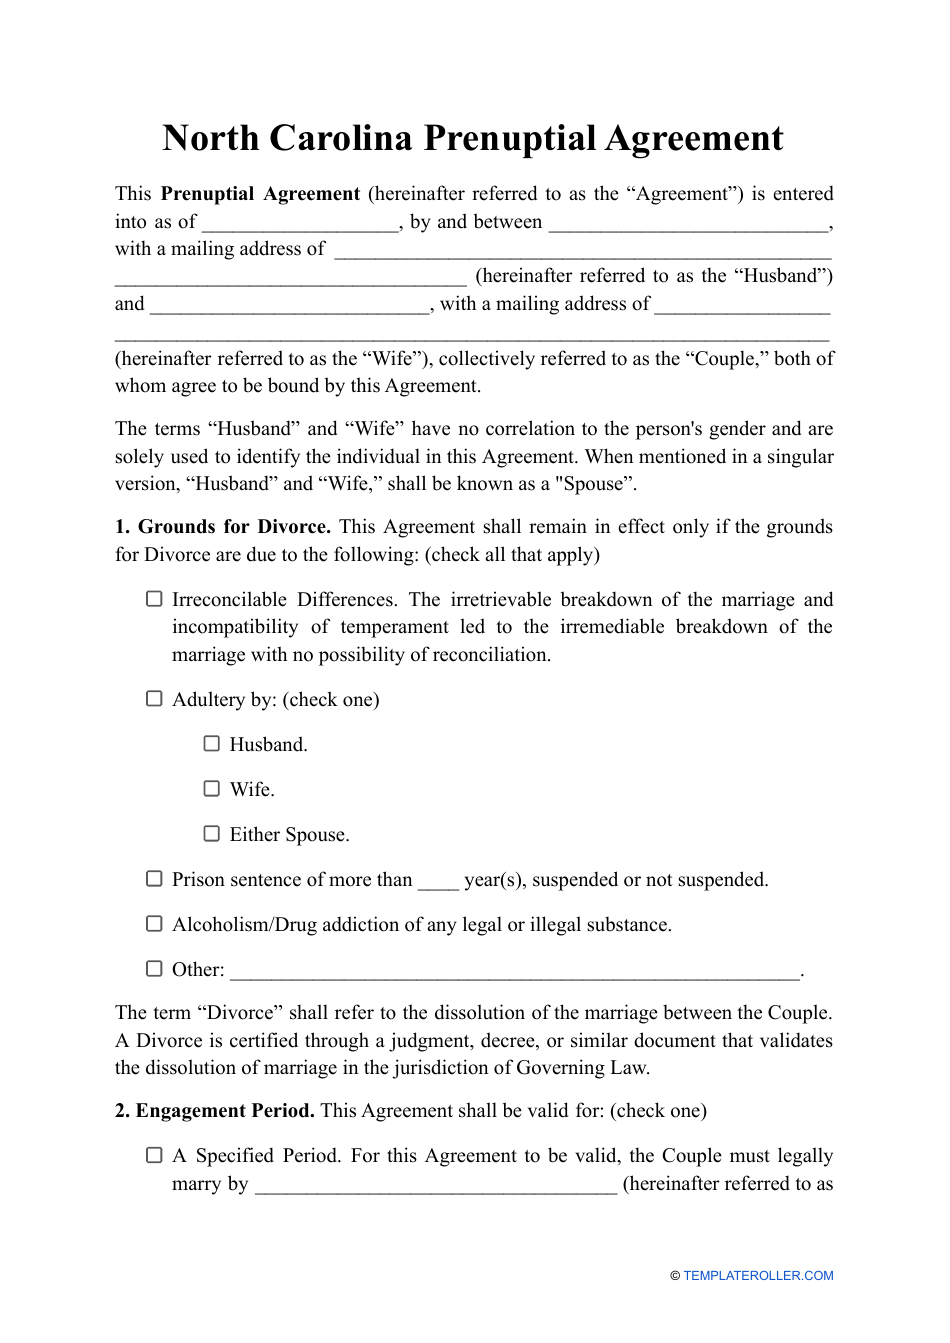 North Carolina Prenuptial Agreement Template Fill Out, Sign Online